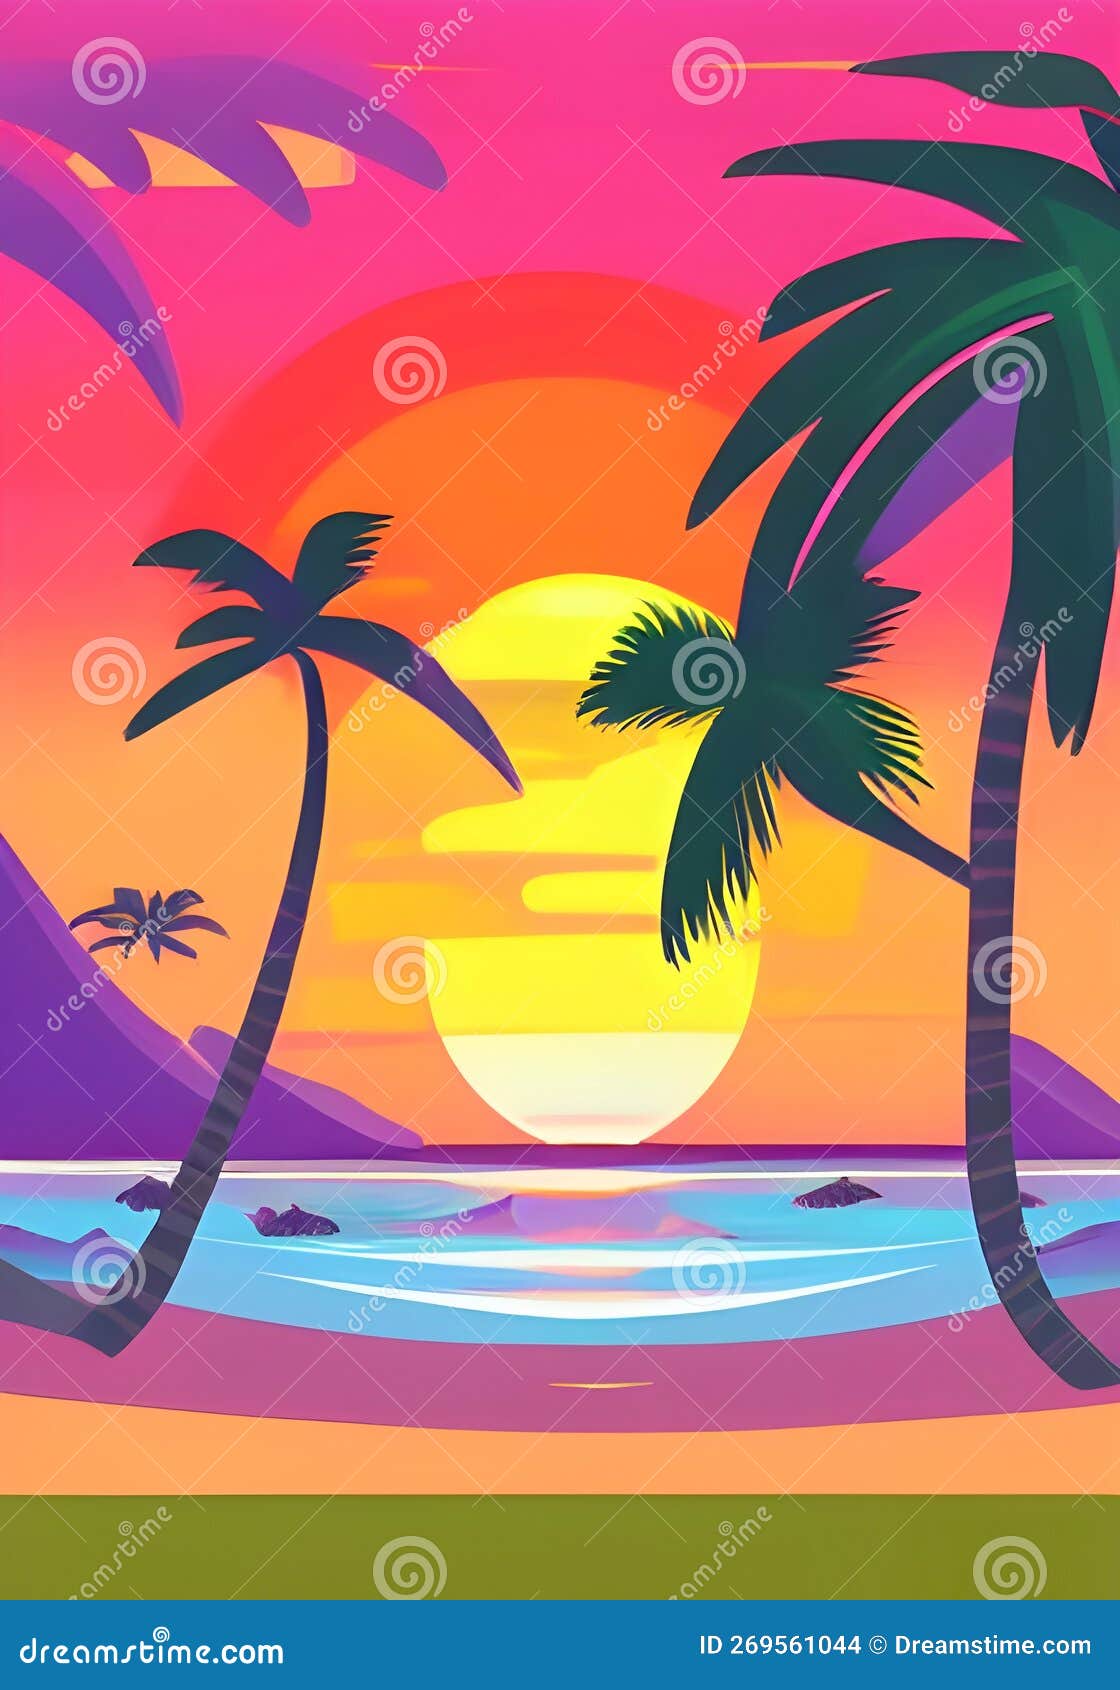 Twilight Serenity Illustrated Sunset at the Beach with Palms Stock ...